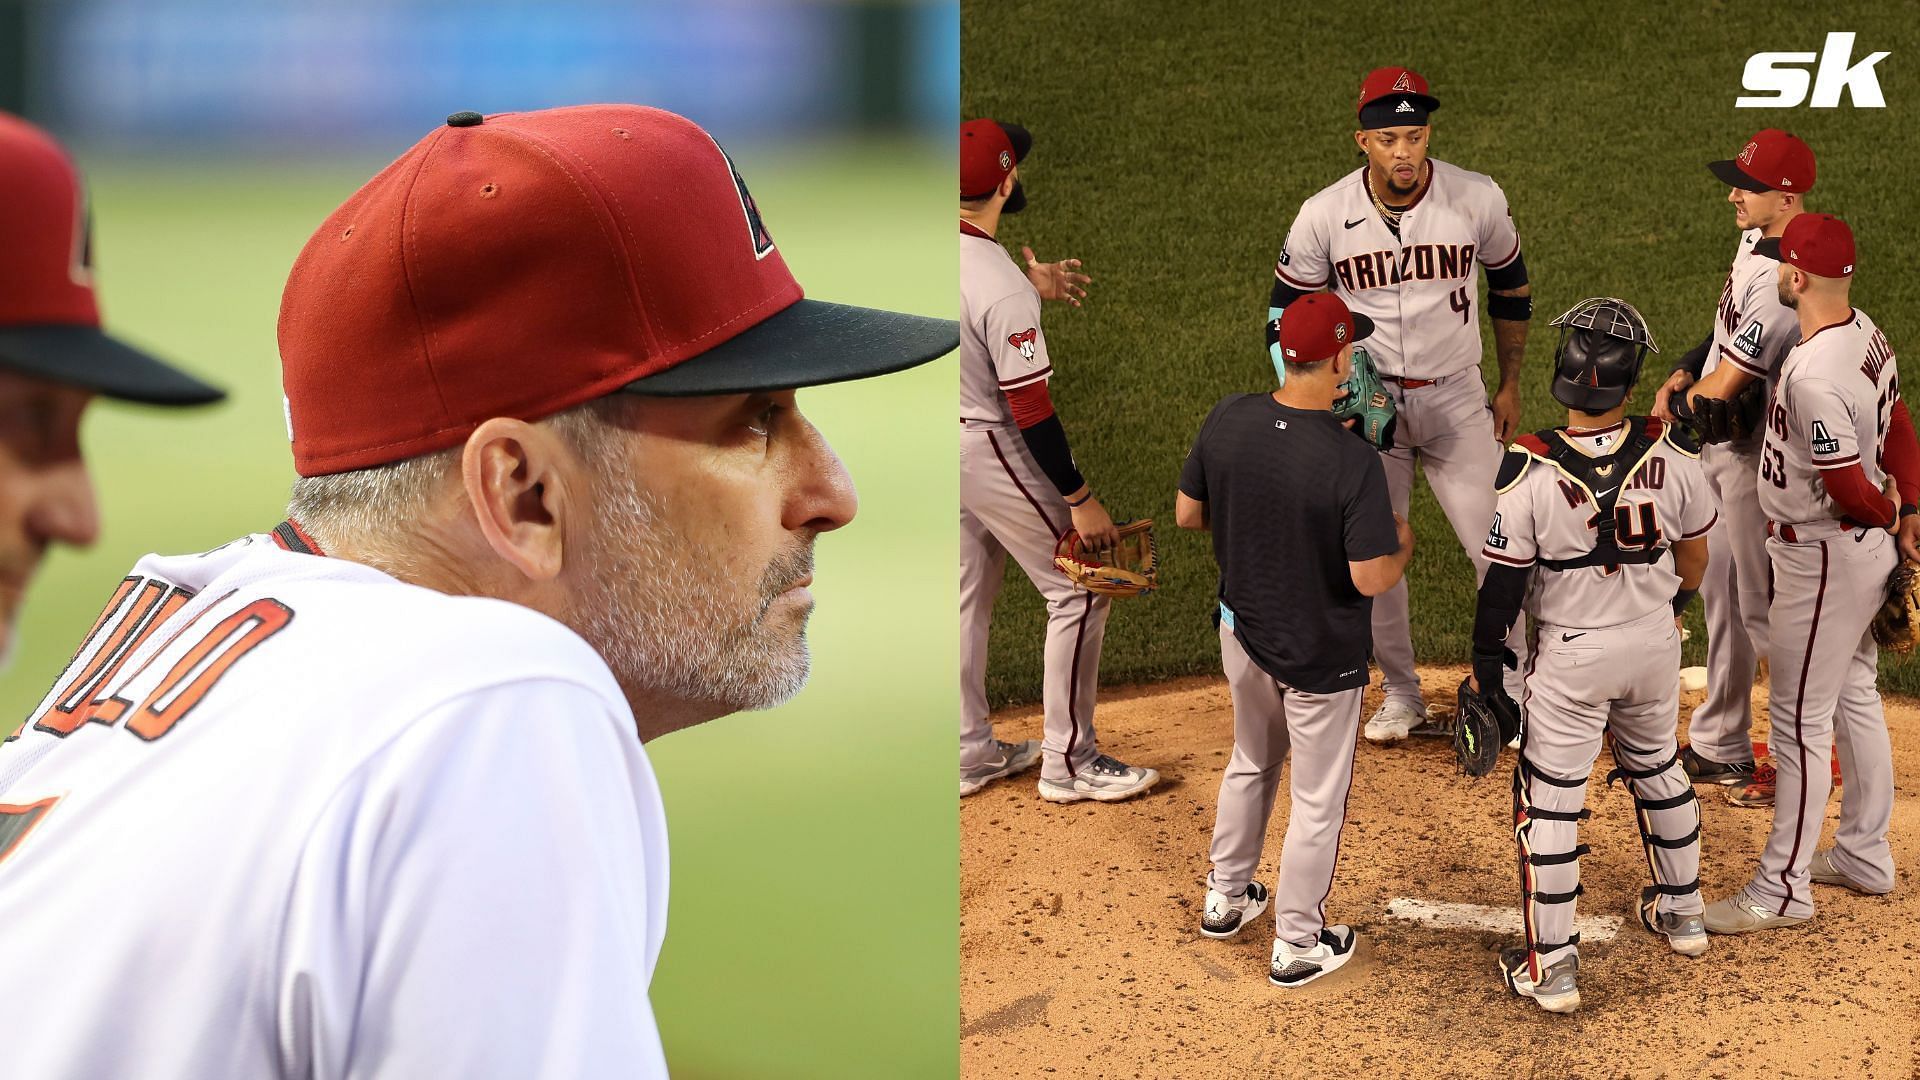 Torey Lovullo is not interested in speculating on his bullpen use in Game 3